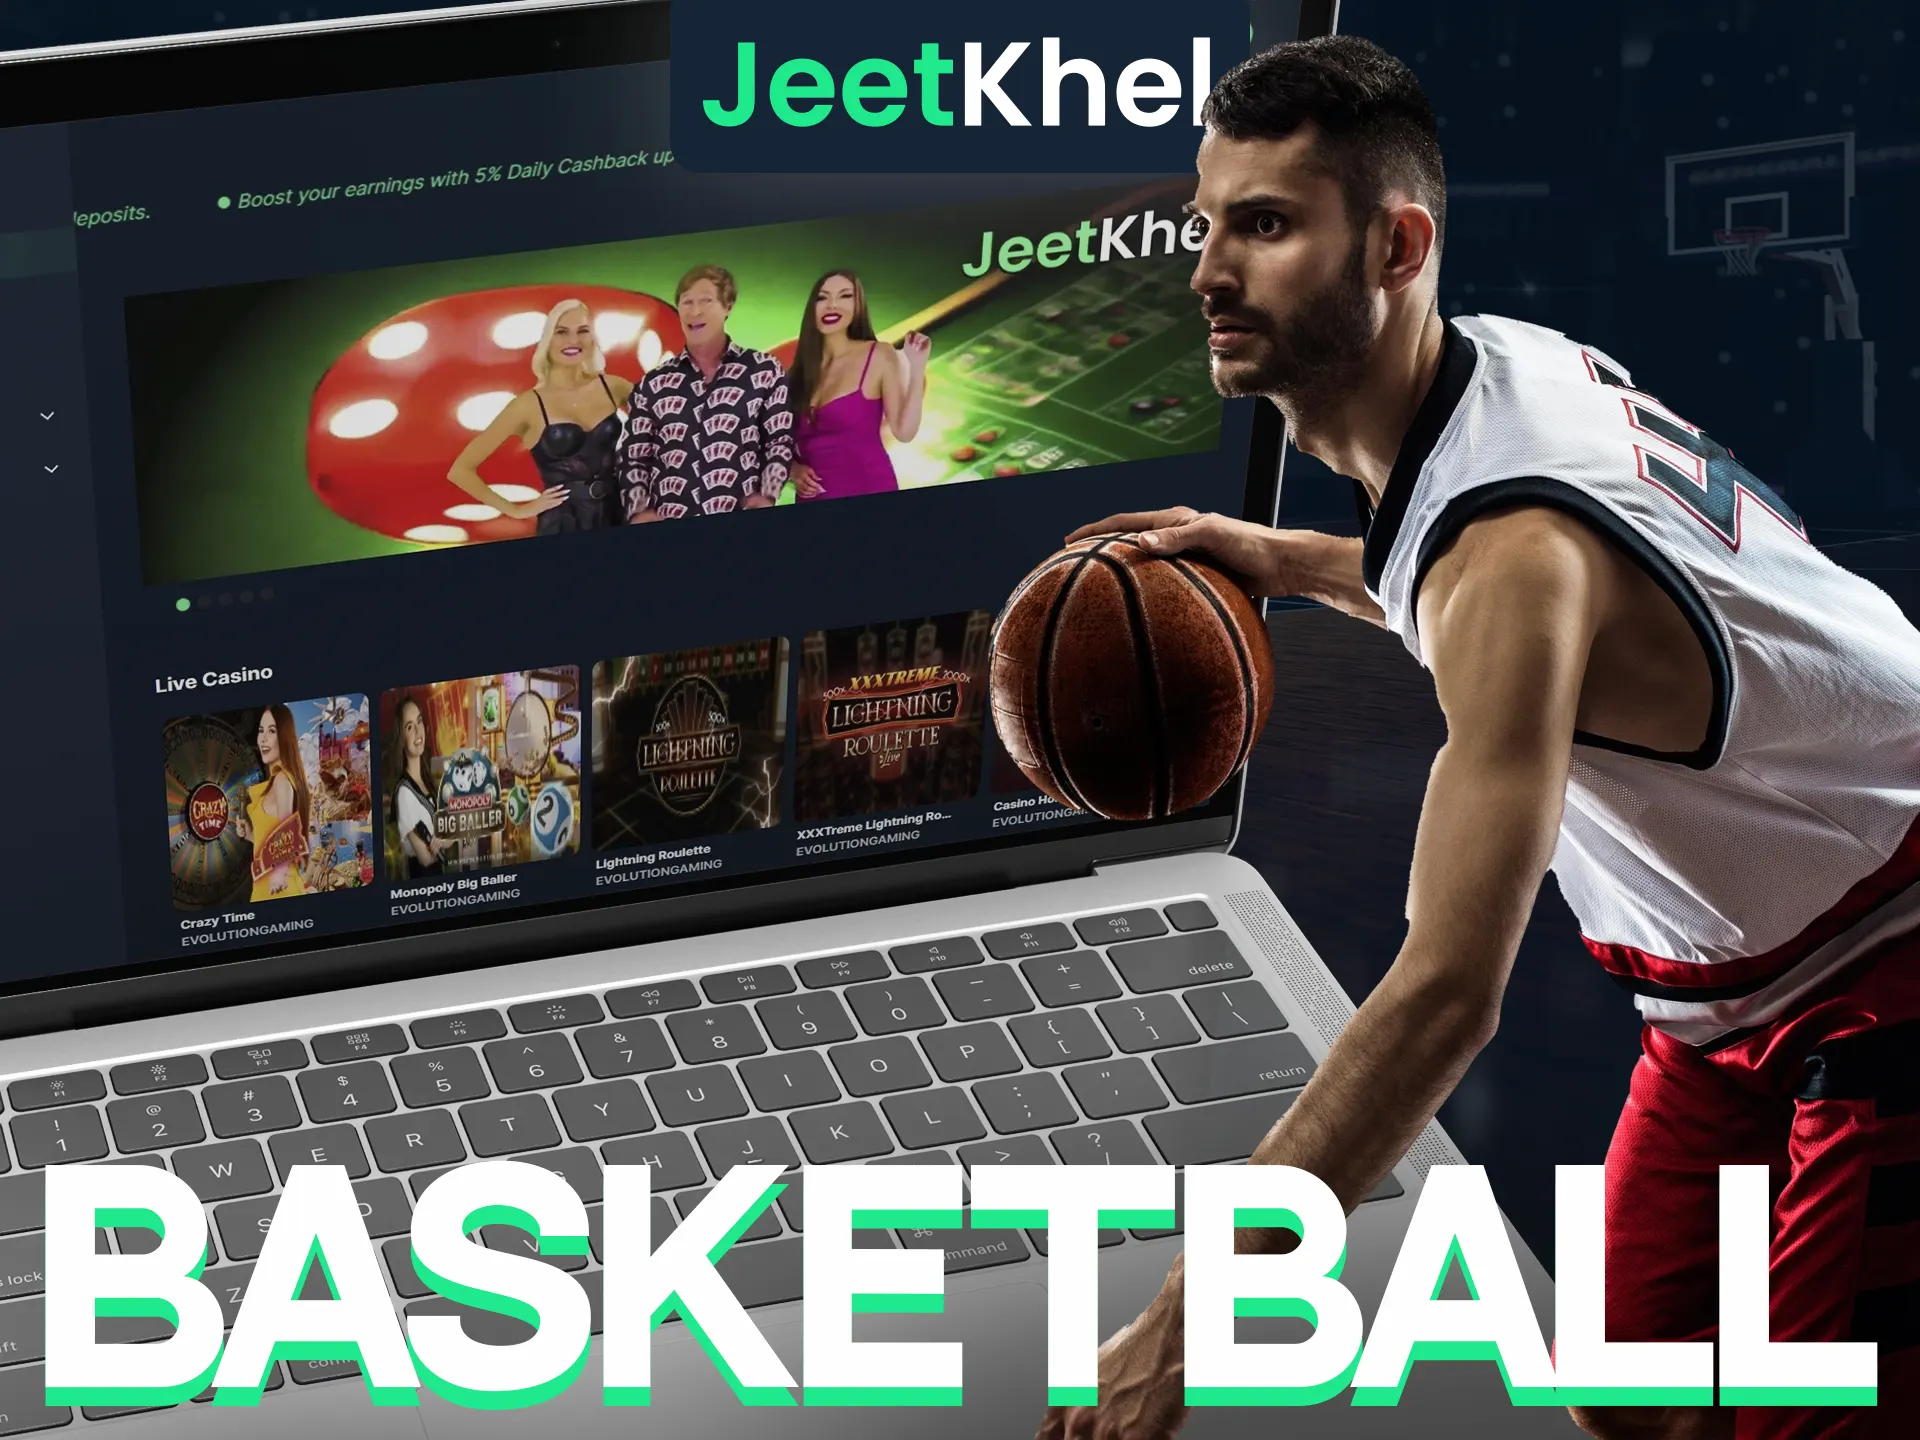 Place your basketball bets with Jeetkheel.